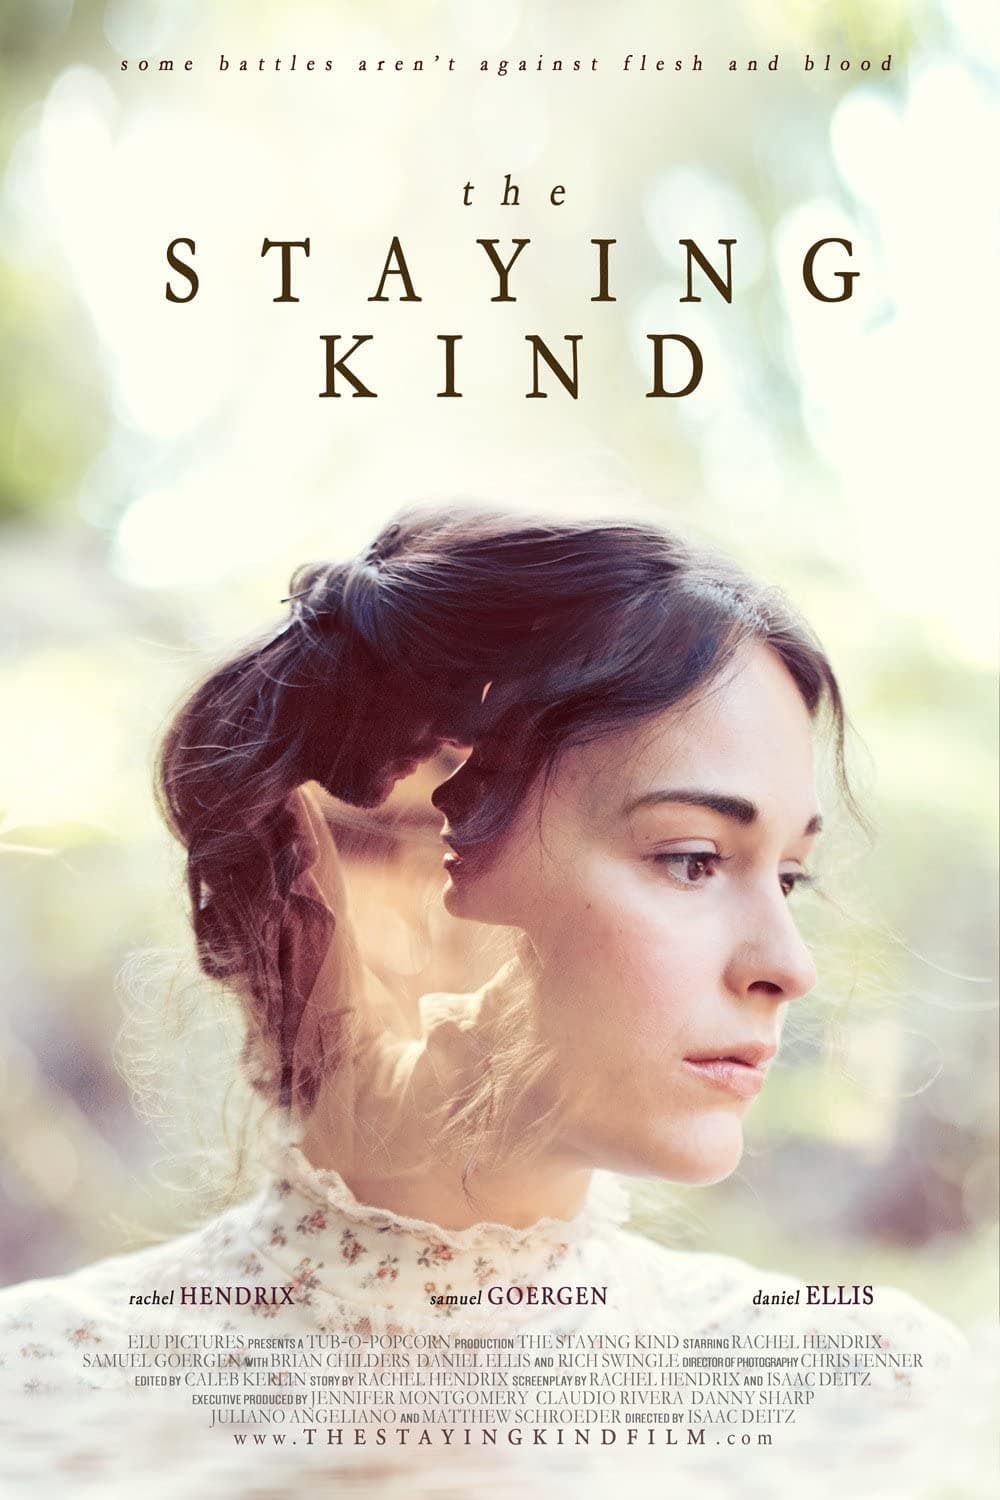 The Staying Kind